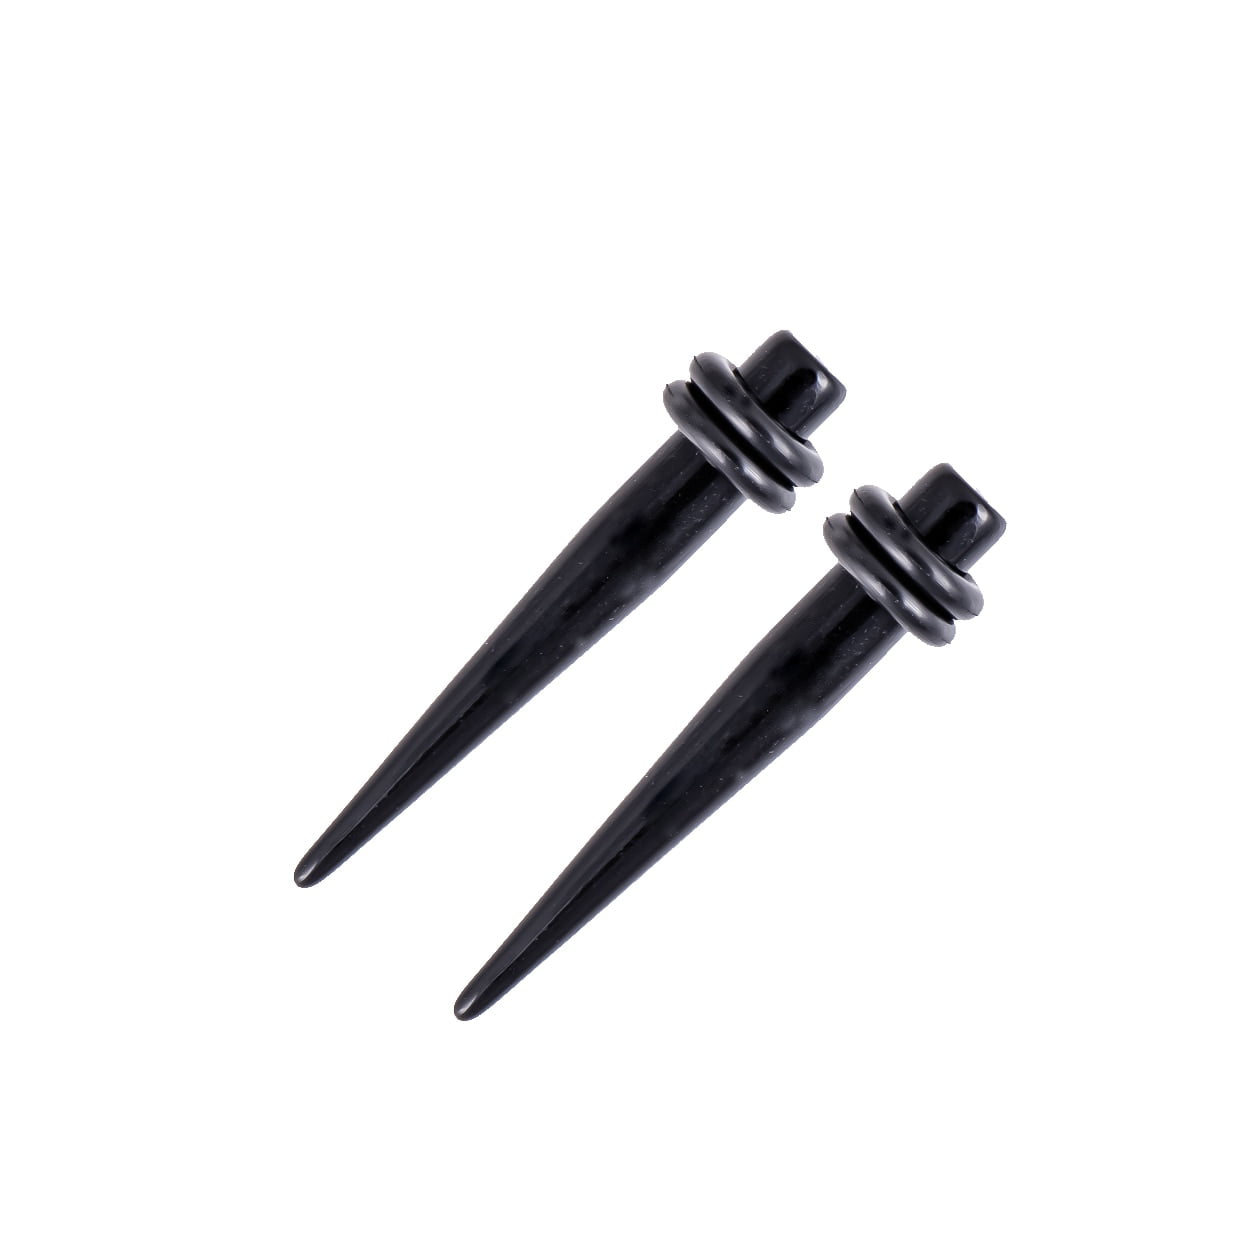 00G 10mm Black White Ear Expanders Stretchers Tapers 1 Pair 